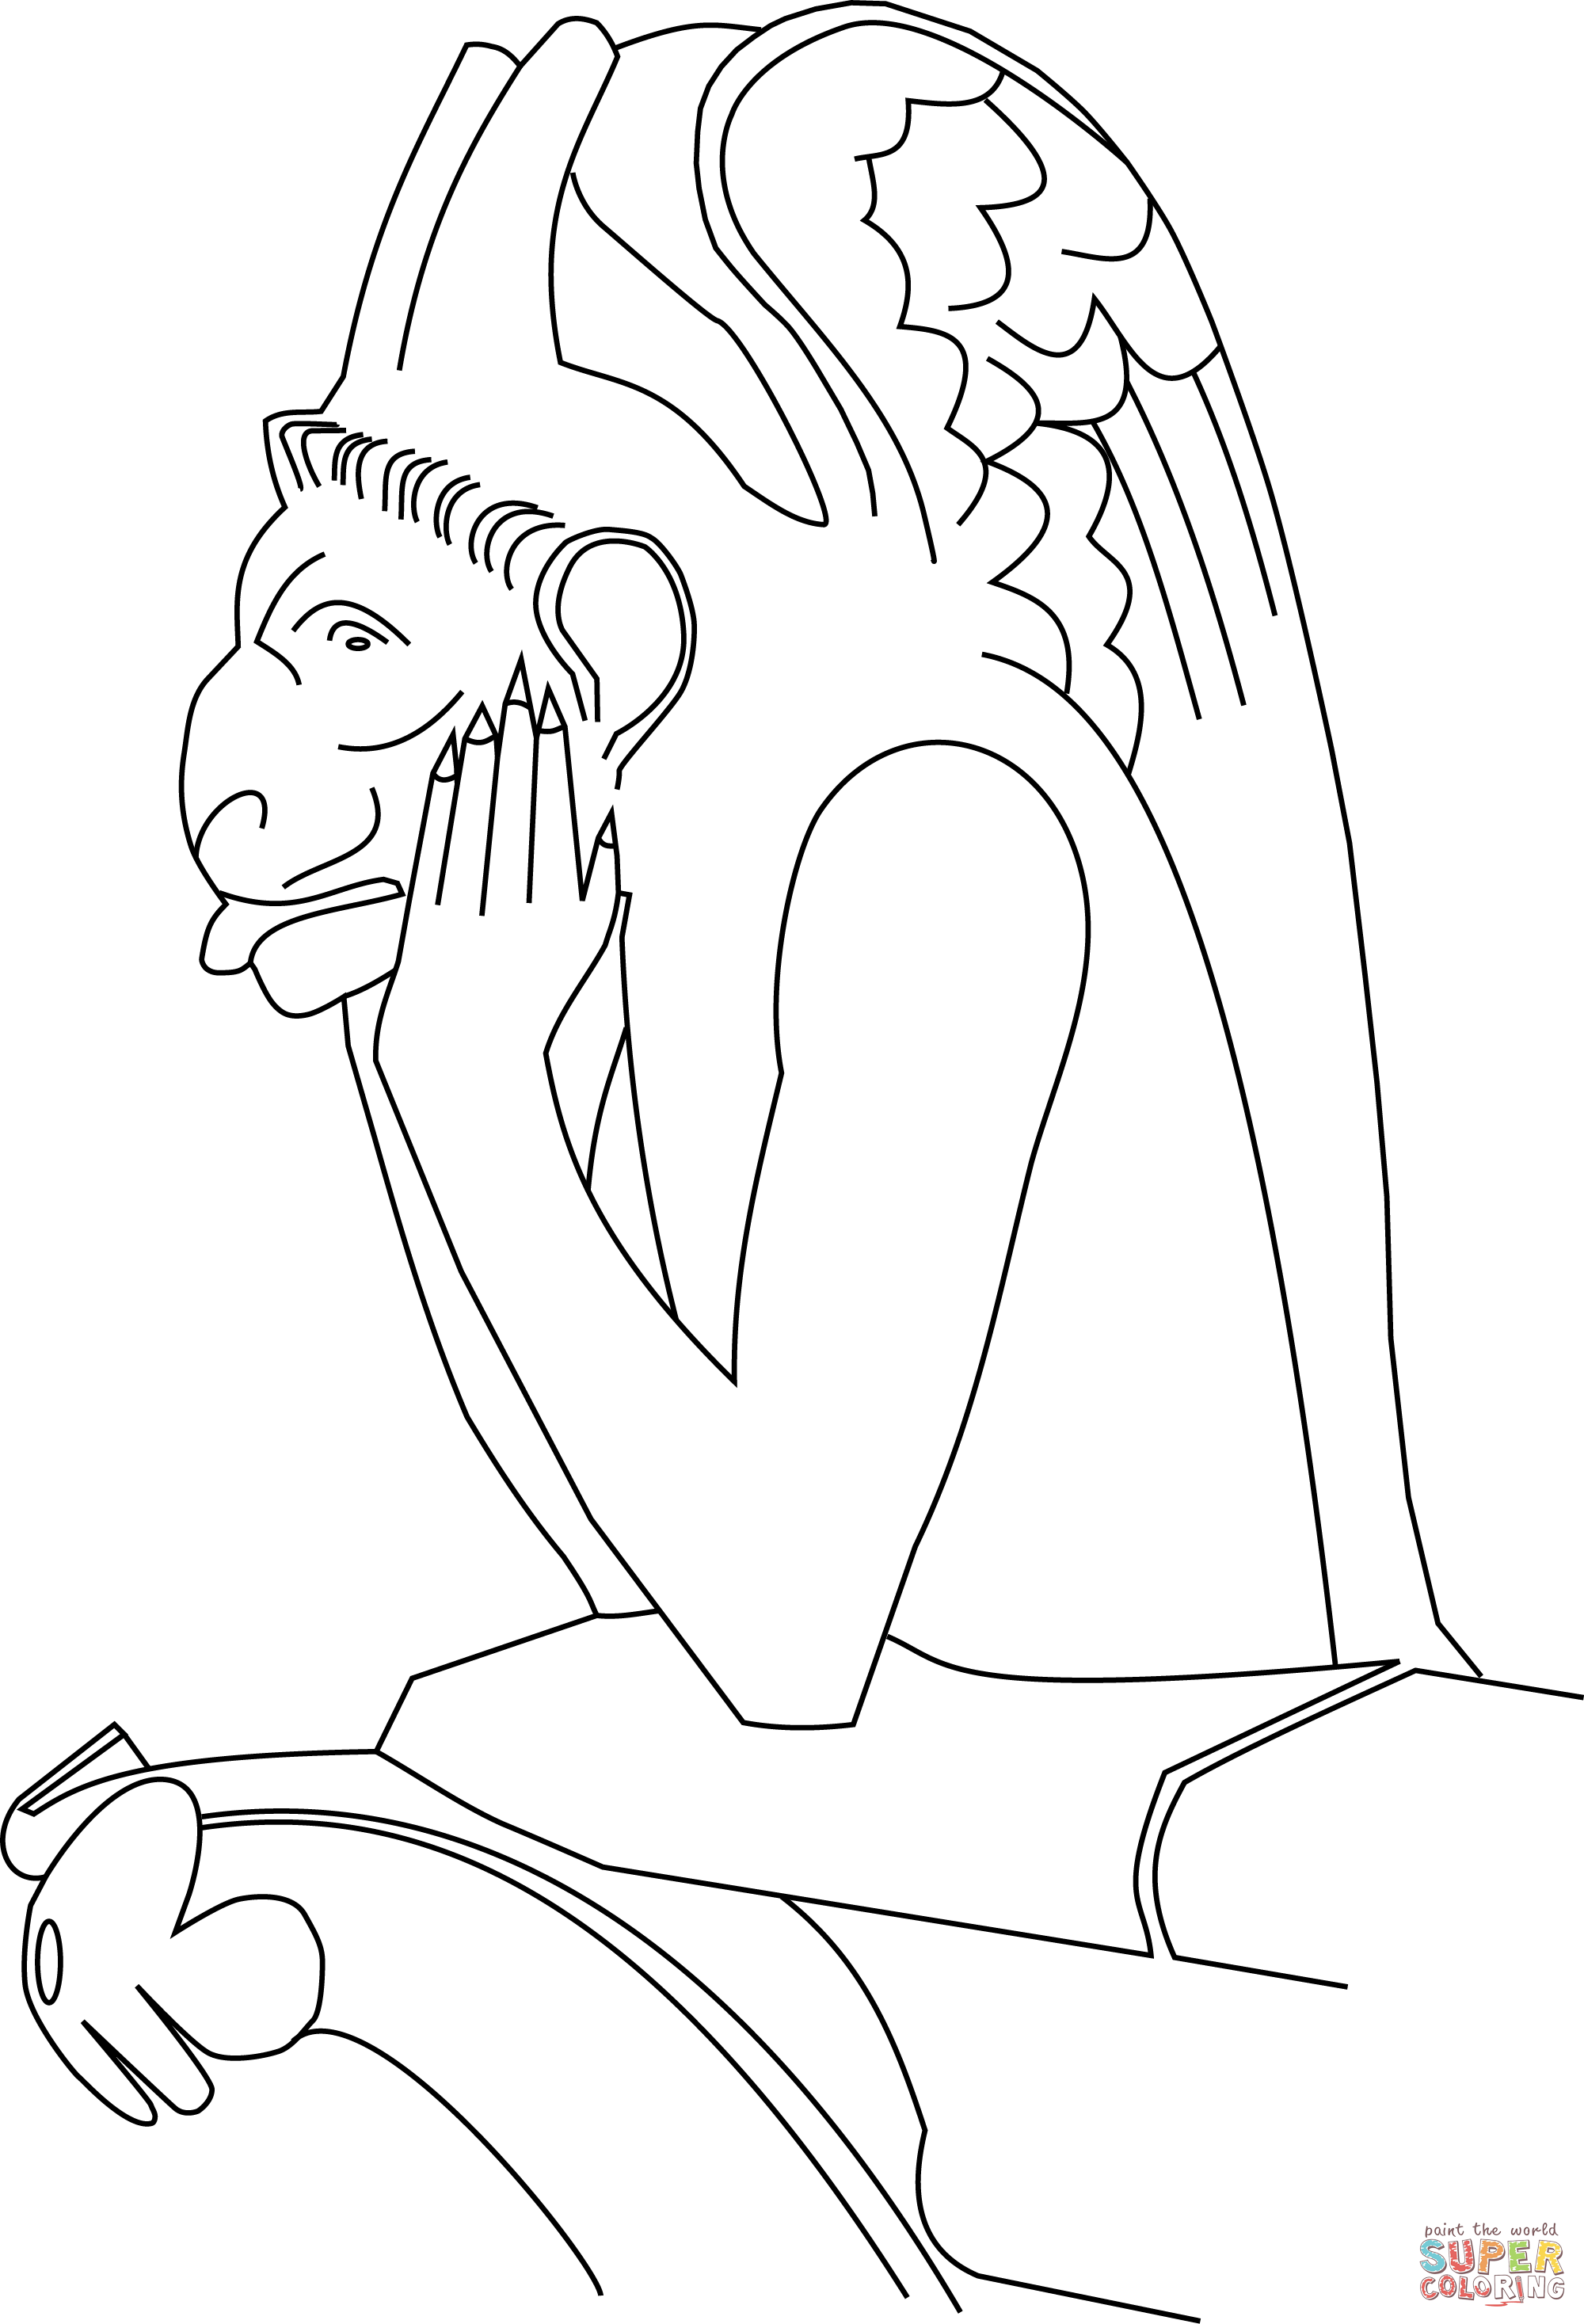 Gargoyle coloring page free printable coloring pages